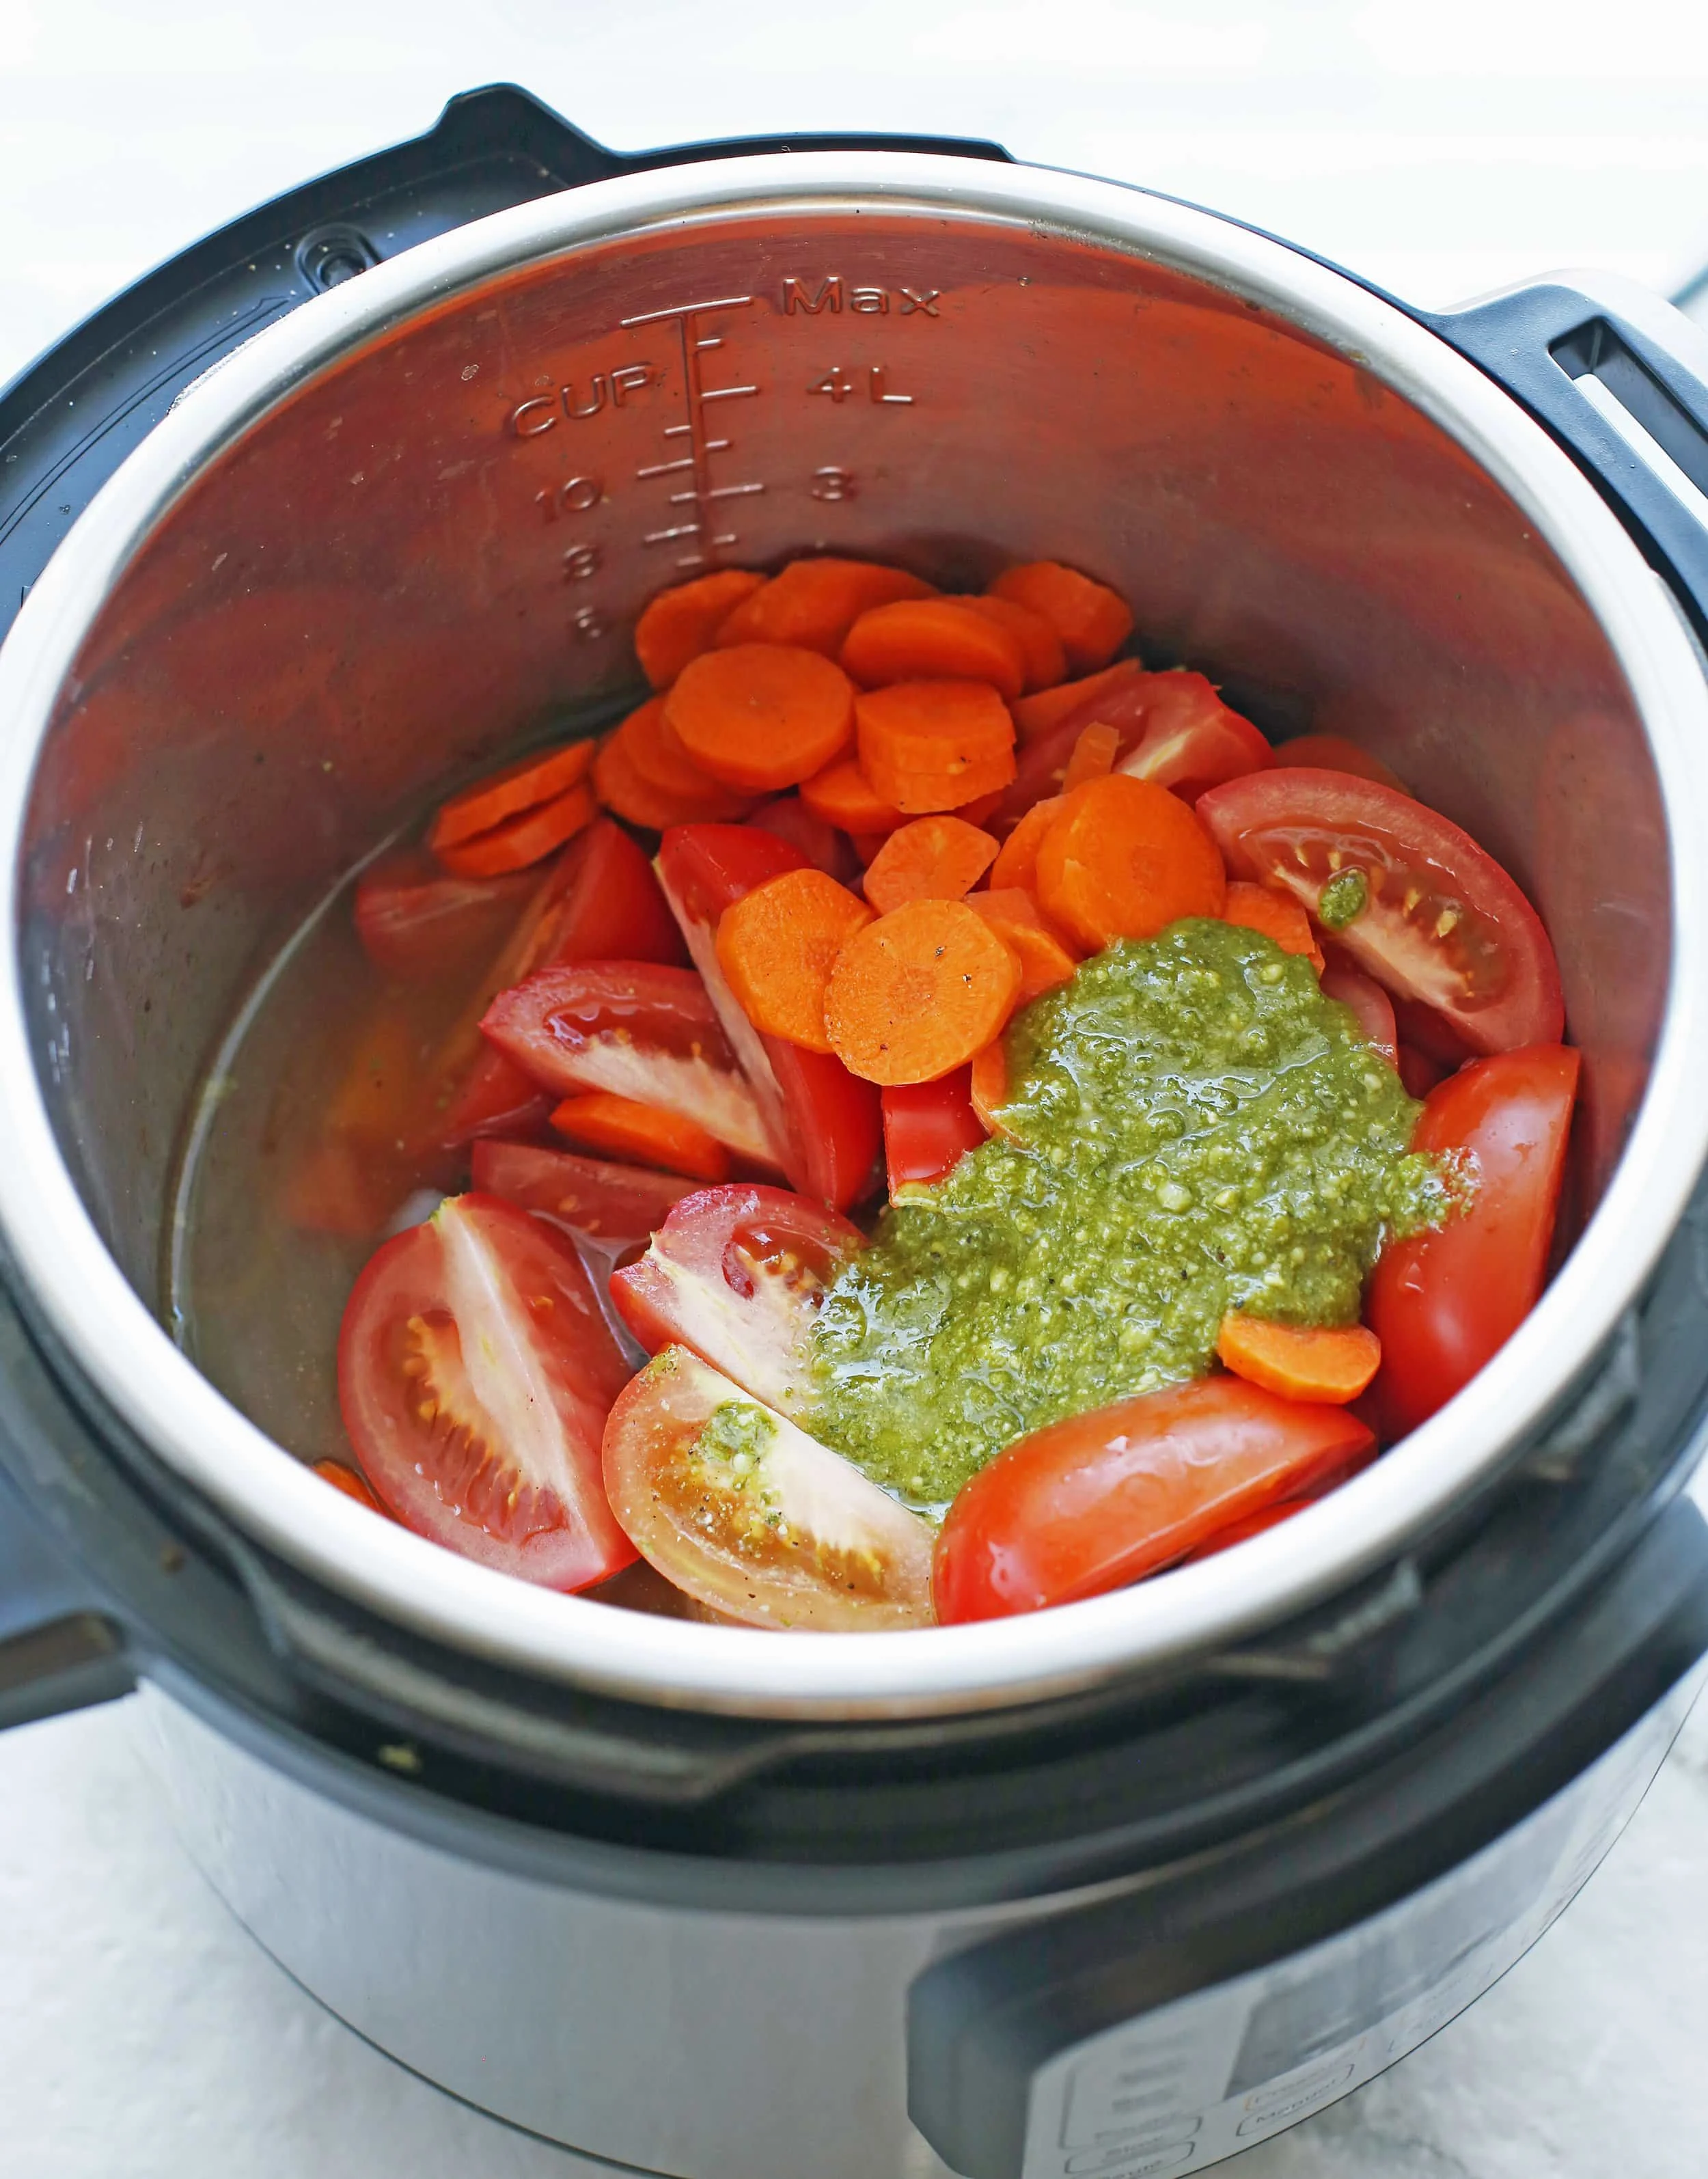 Onions, tomatoes, pesto, carrots, broth, and seasoning in the Instant Pot.